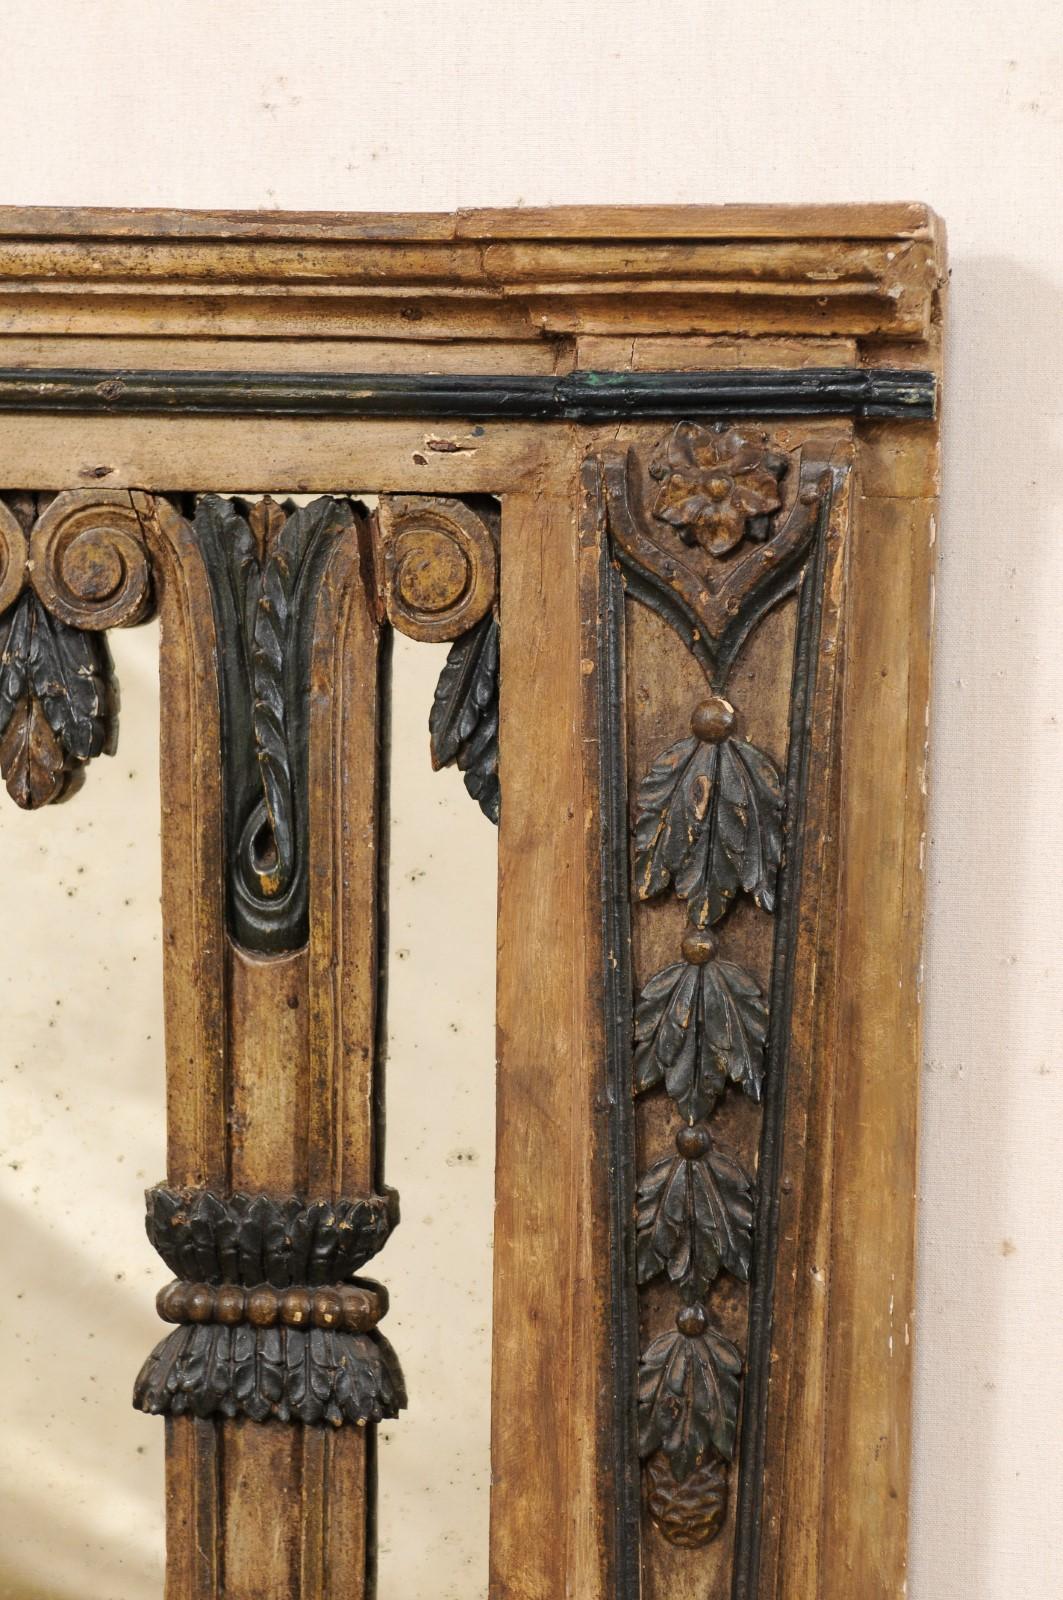 Glass Early 19th Century Portuguese Carved Wood Gate with Mirror at Backside For Sale